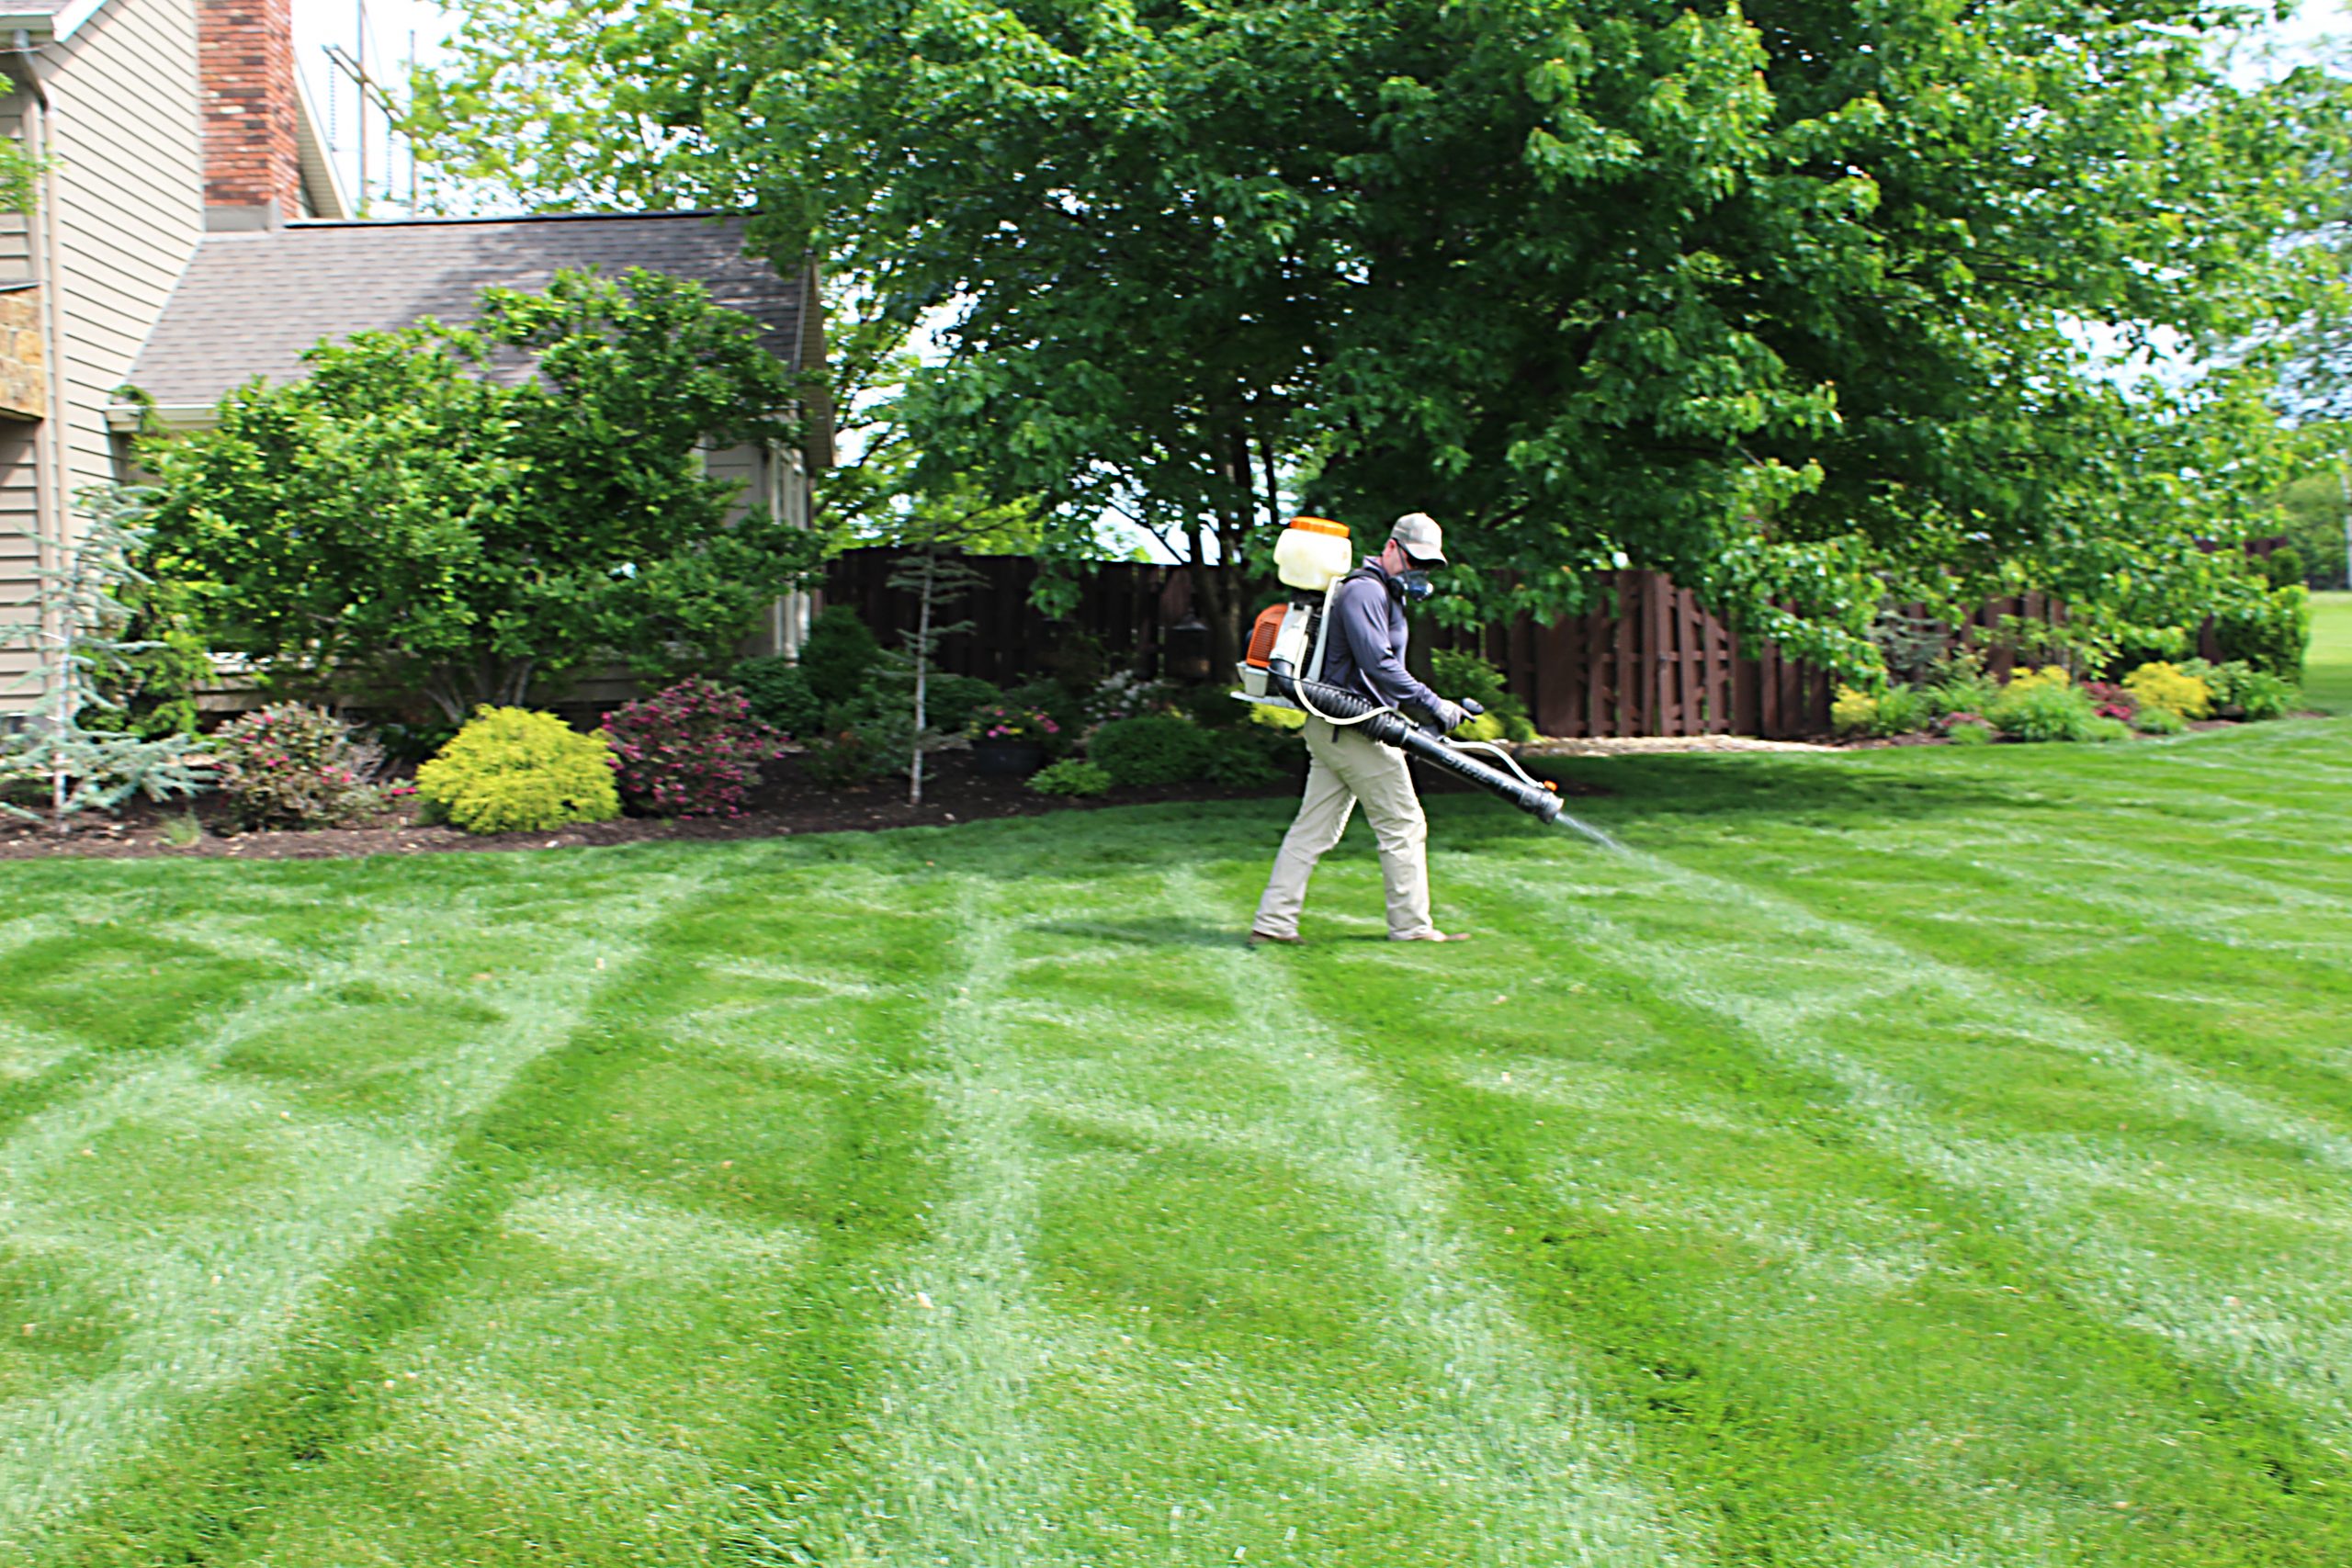 Best Lawn Care Service | Aerate, Seeding Lawn in Spring | RYAN Lawn